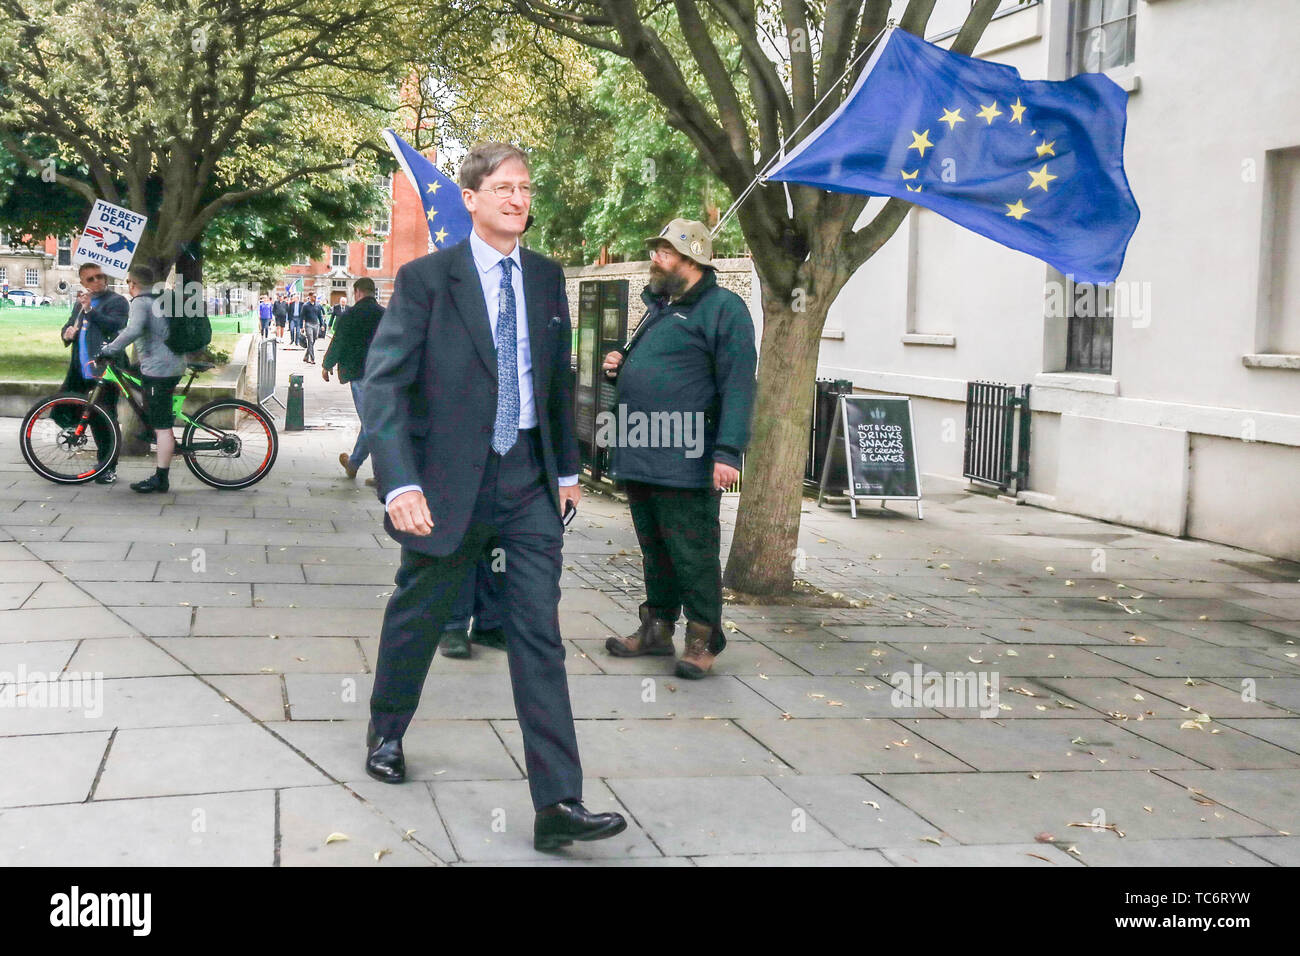 London UK. 6th June 2019. Former Attorney General and Pro Remain MP, Dominic Grieve seen in Westminster. Dominic Grieve has been criticised by his local constituents   for his efforts in the House of Commons to frustrate attempts to take the UK out of the European Union and faces deselection after Beaconsfield Conservatives passed a vote of no confidence Credit: amer ghazzal/Alamy Live News Stock Photo